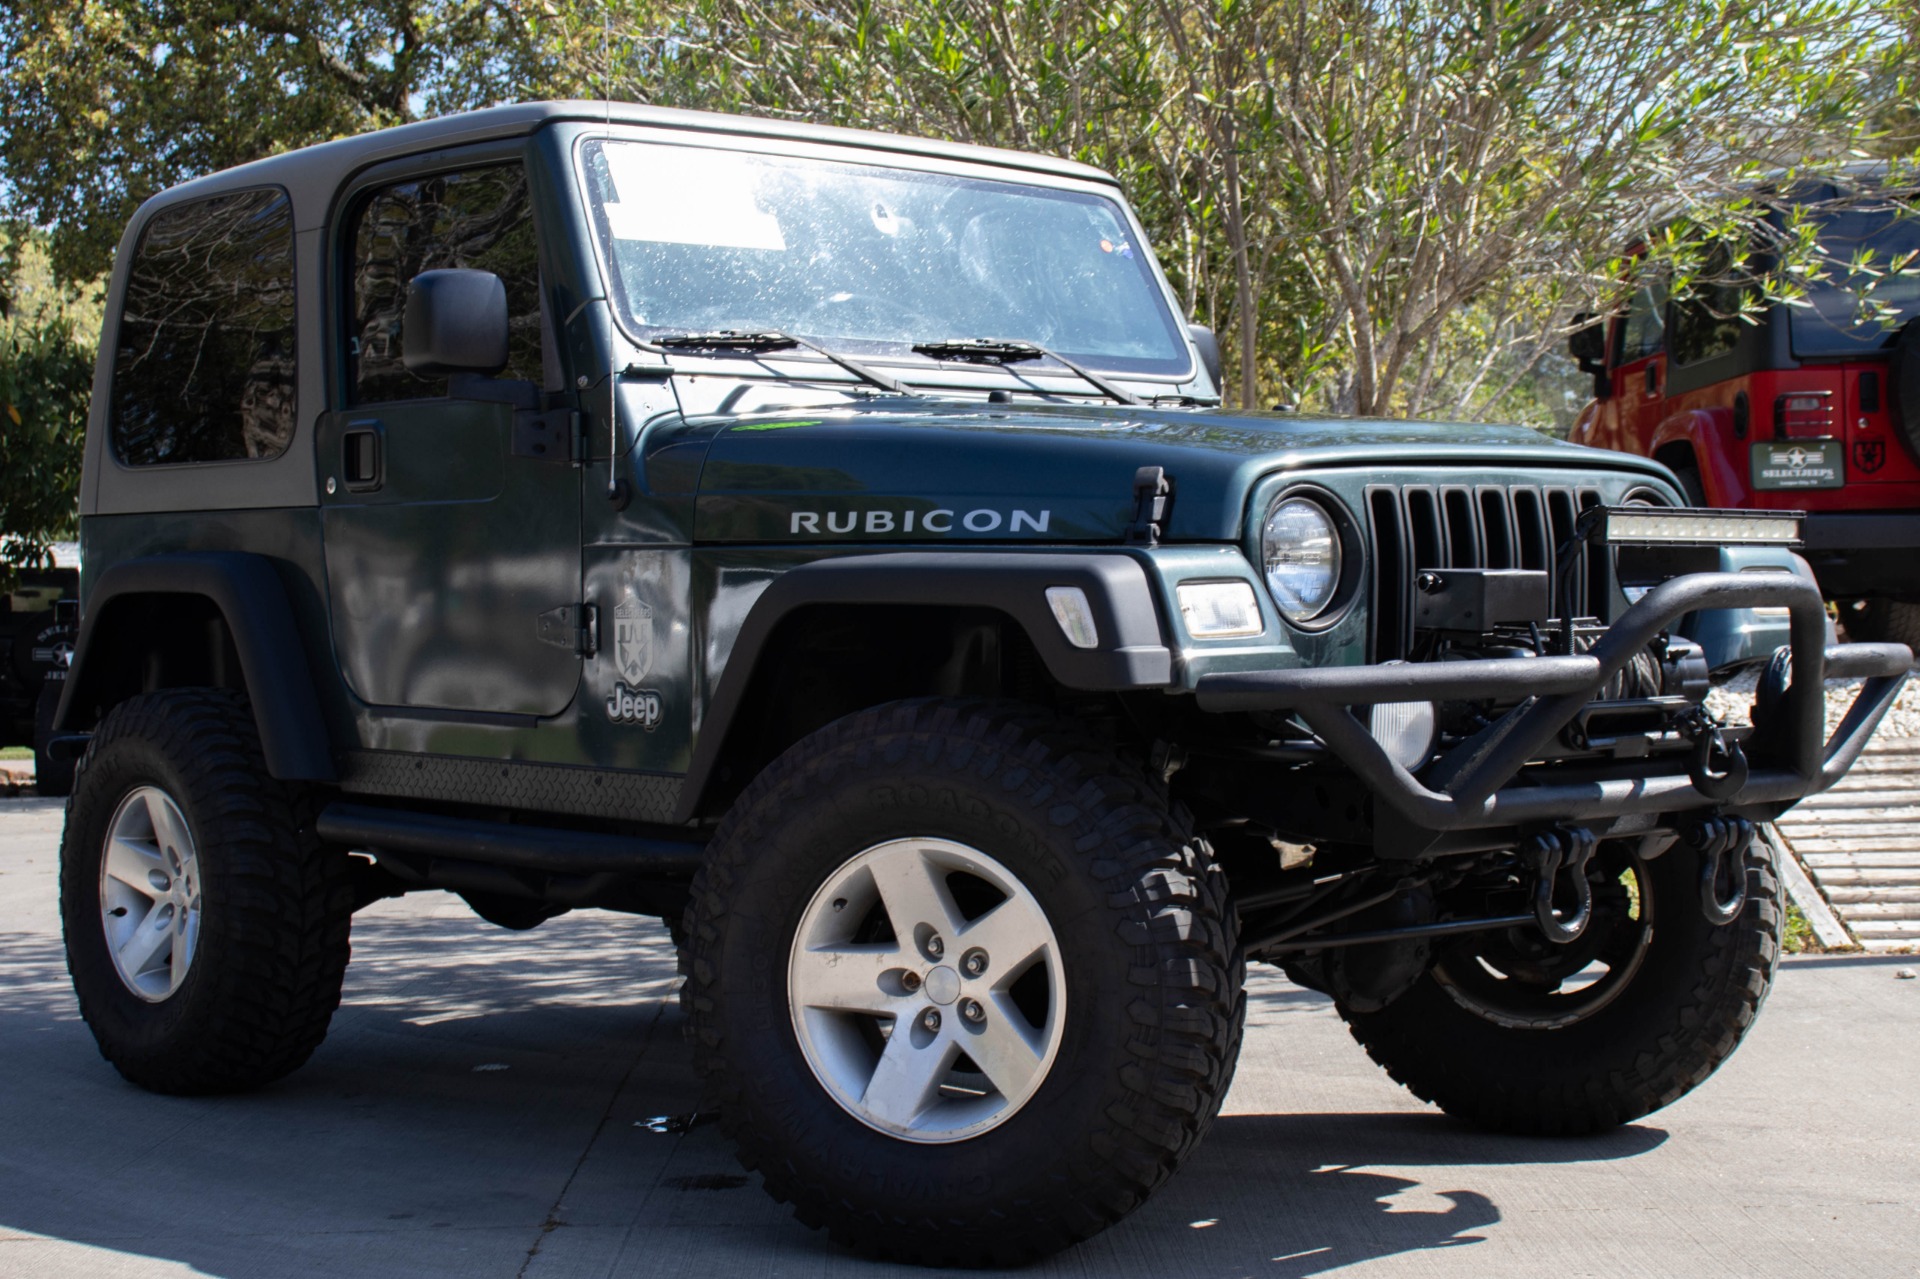 Used 2003 Jeep Wrangler Rubicon For Sale ($14,995) | Select Jeeps Inc.  Stock #334365